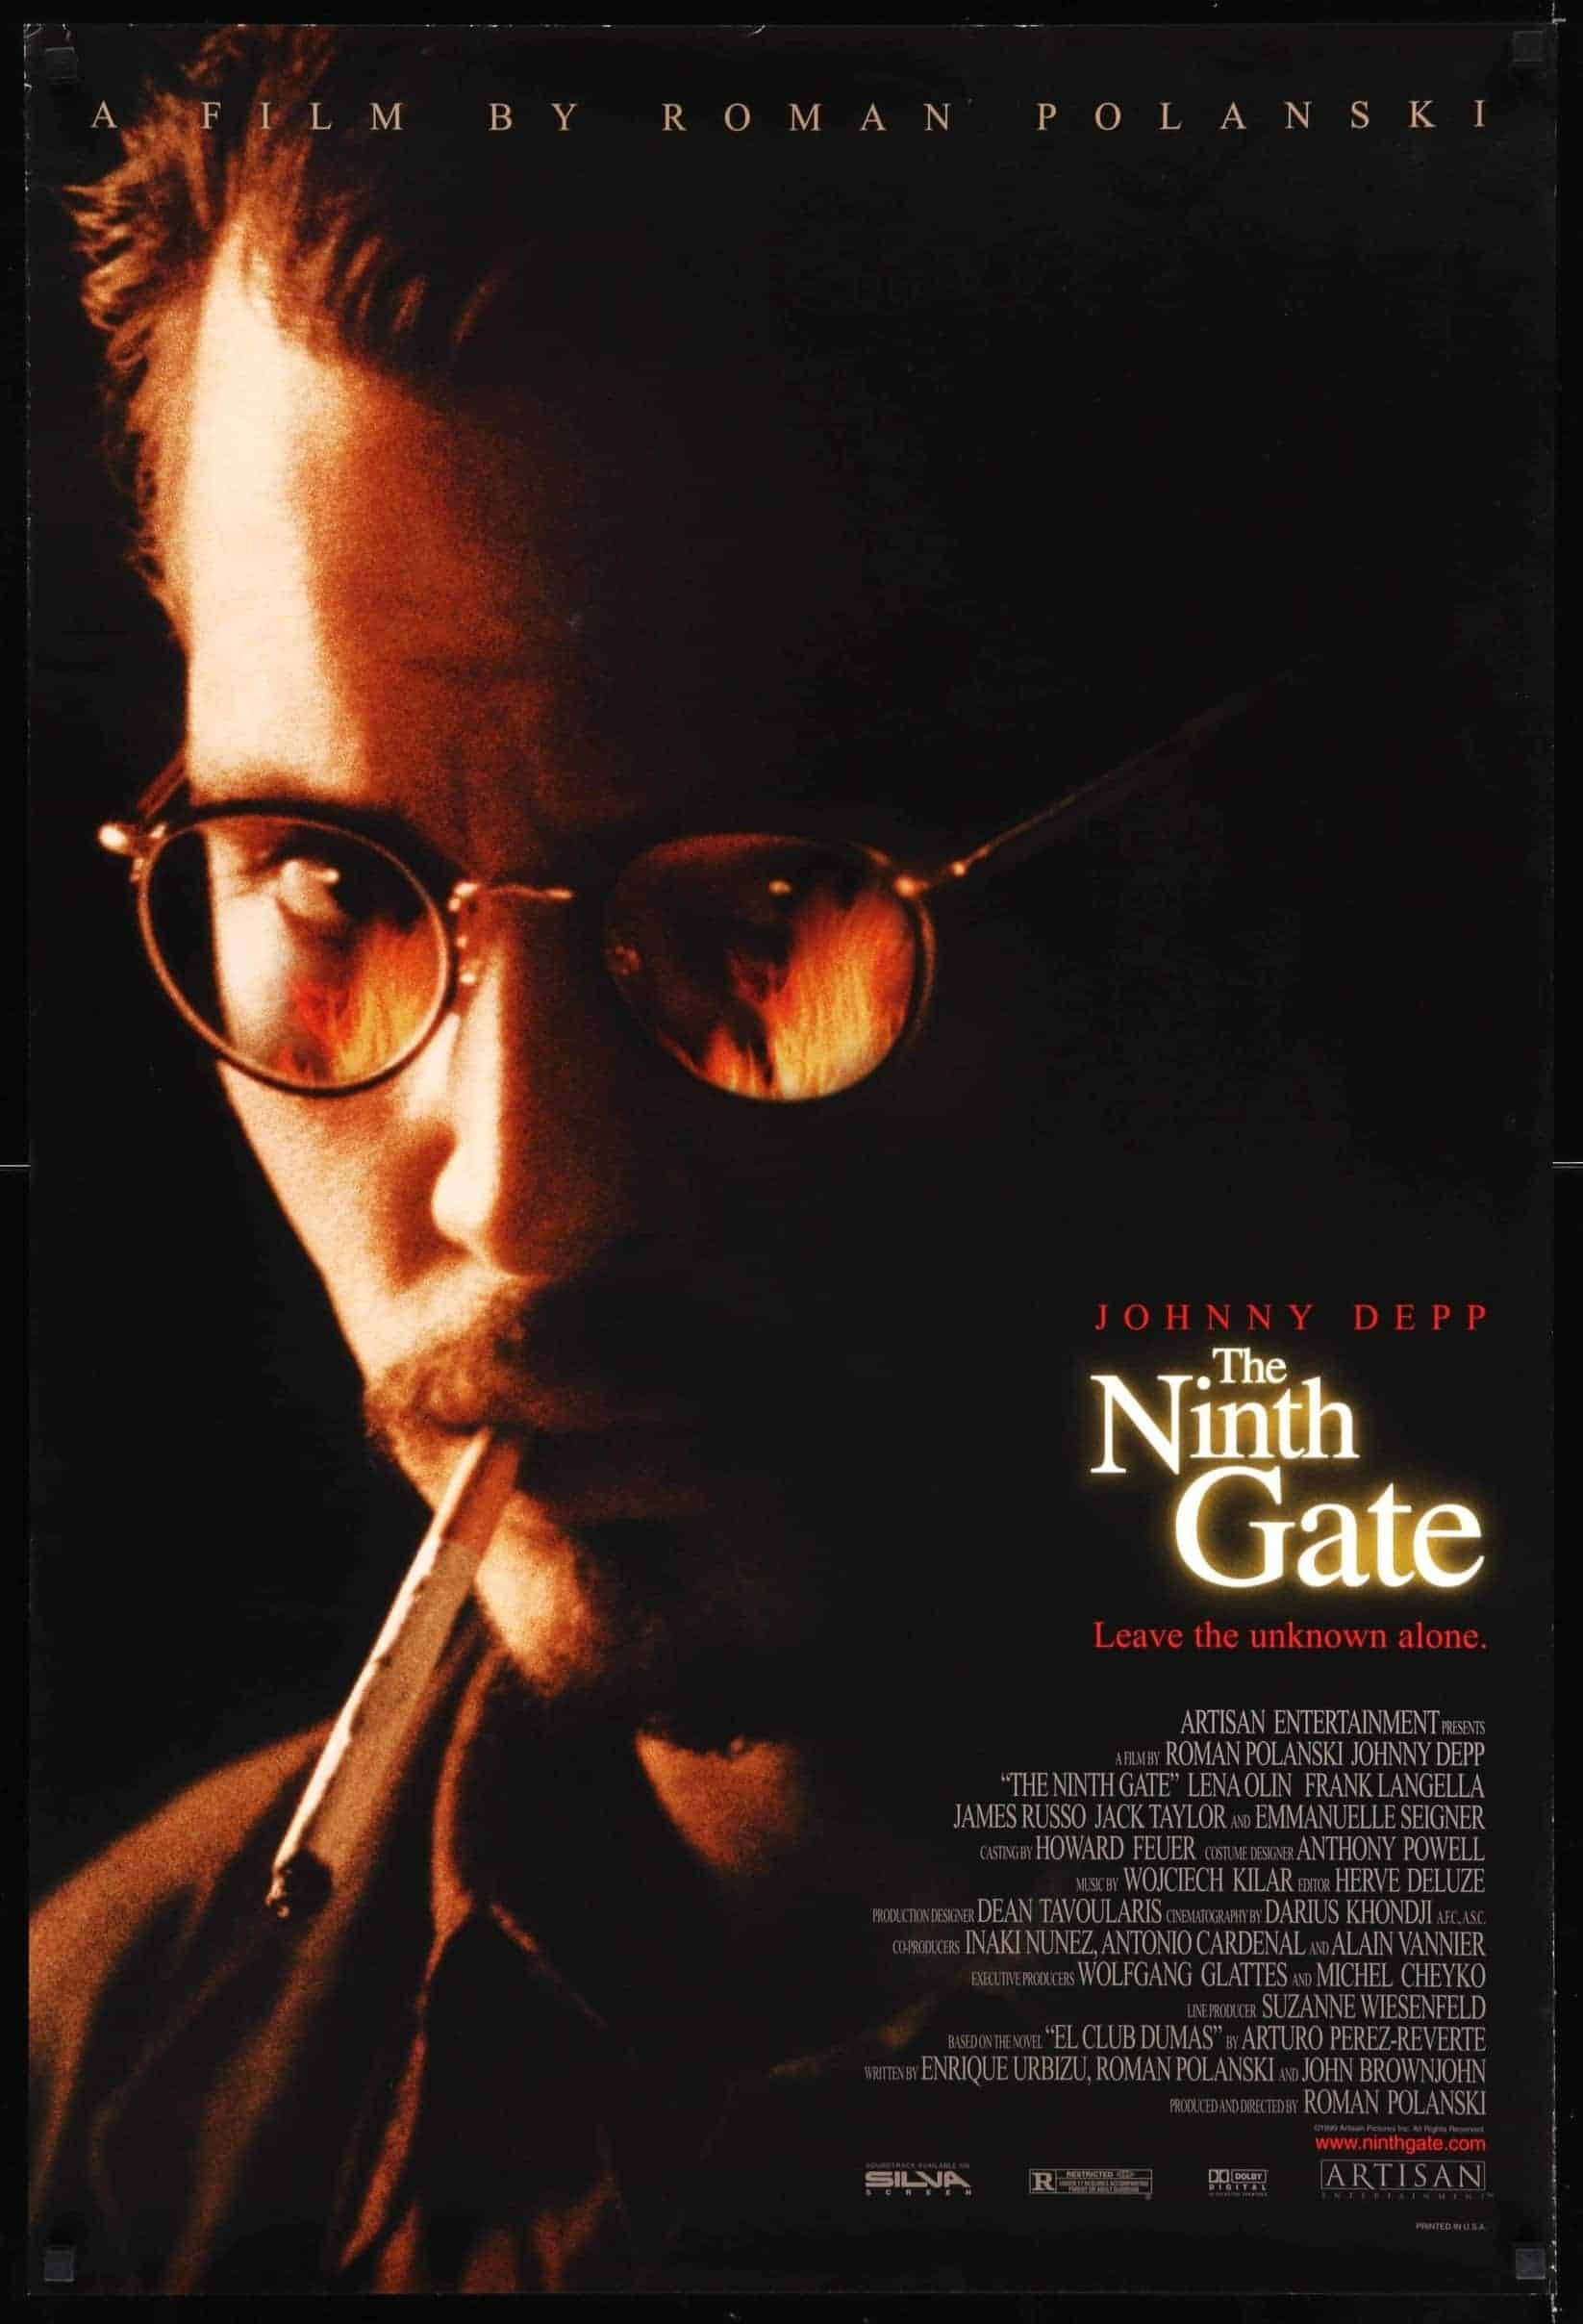 The Ninth Gate (1999) 13 Best Johnny Depp Movies (Ranked)